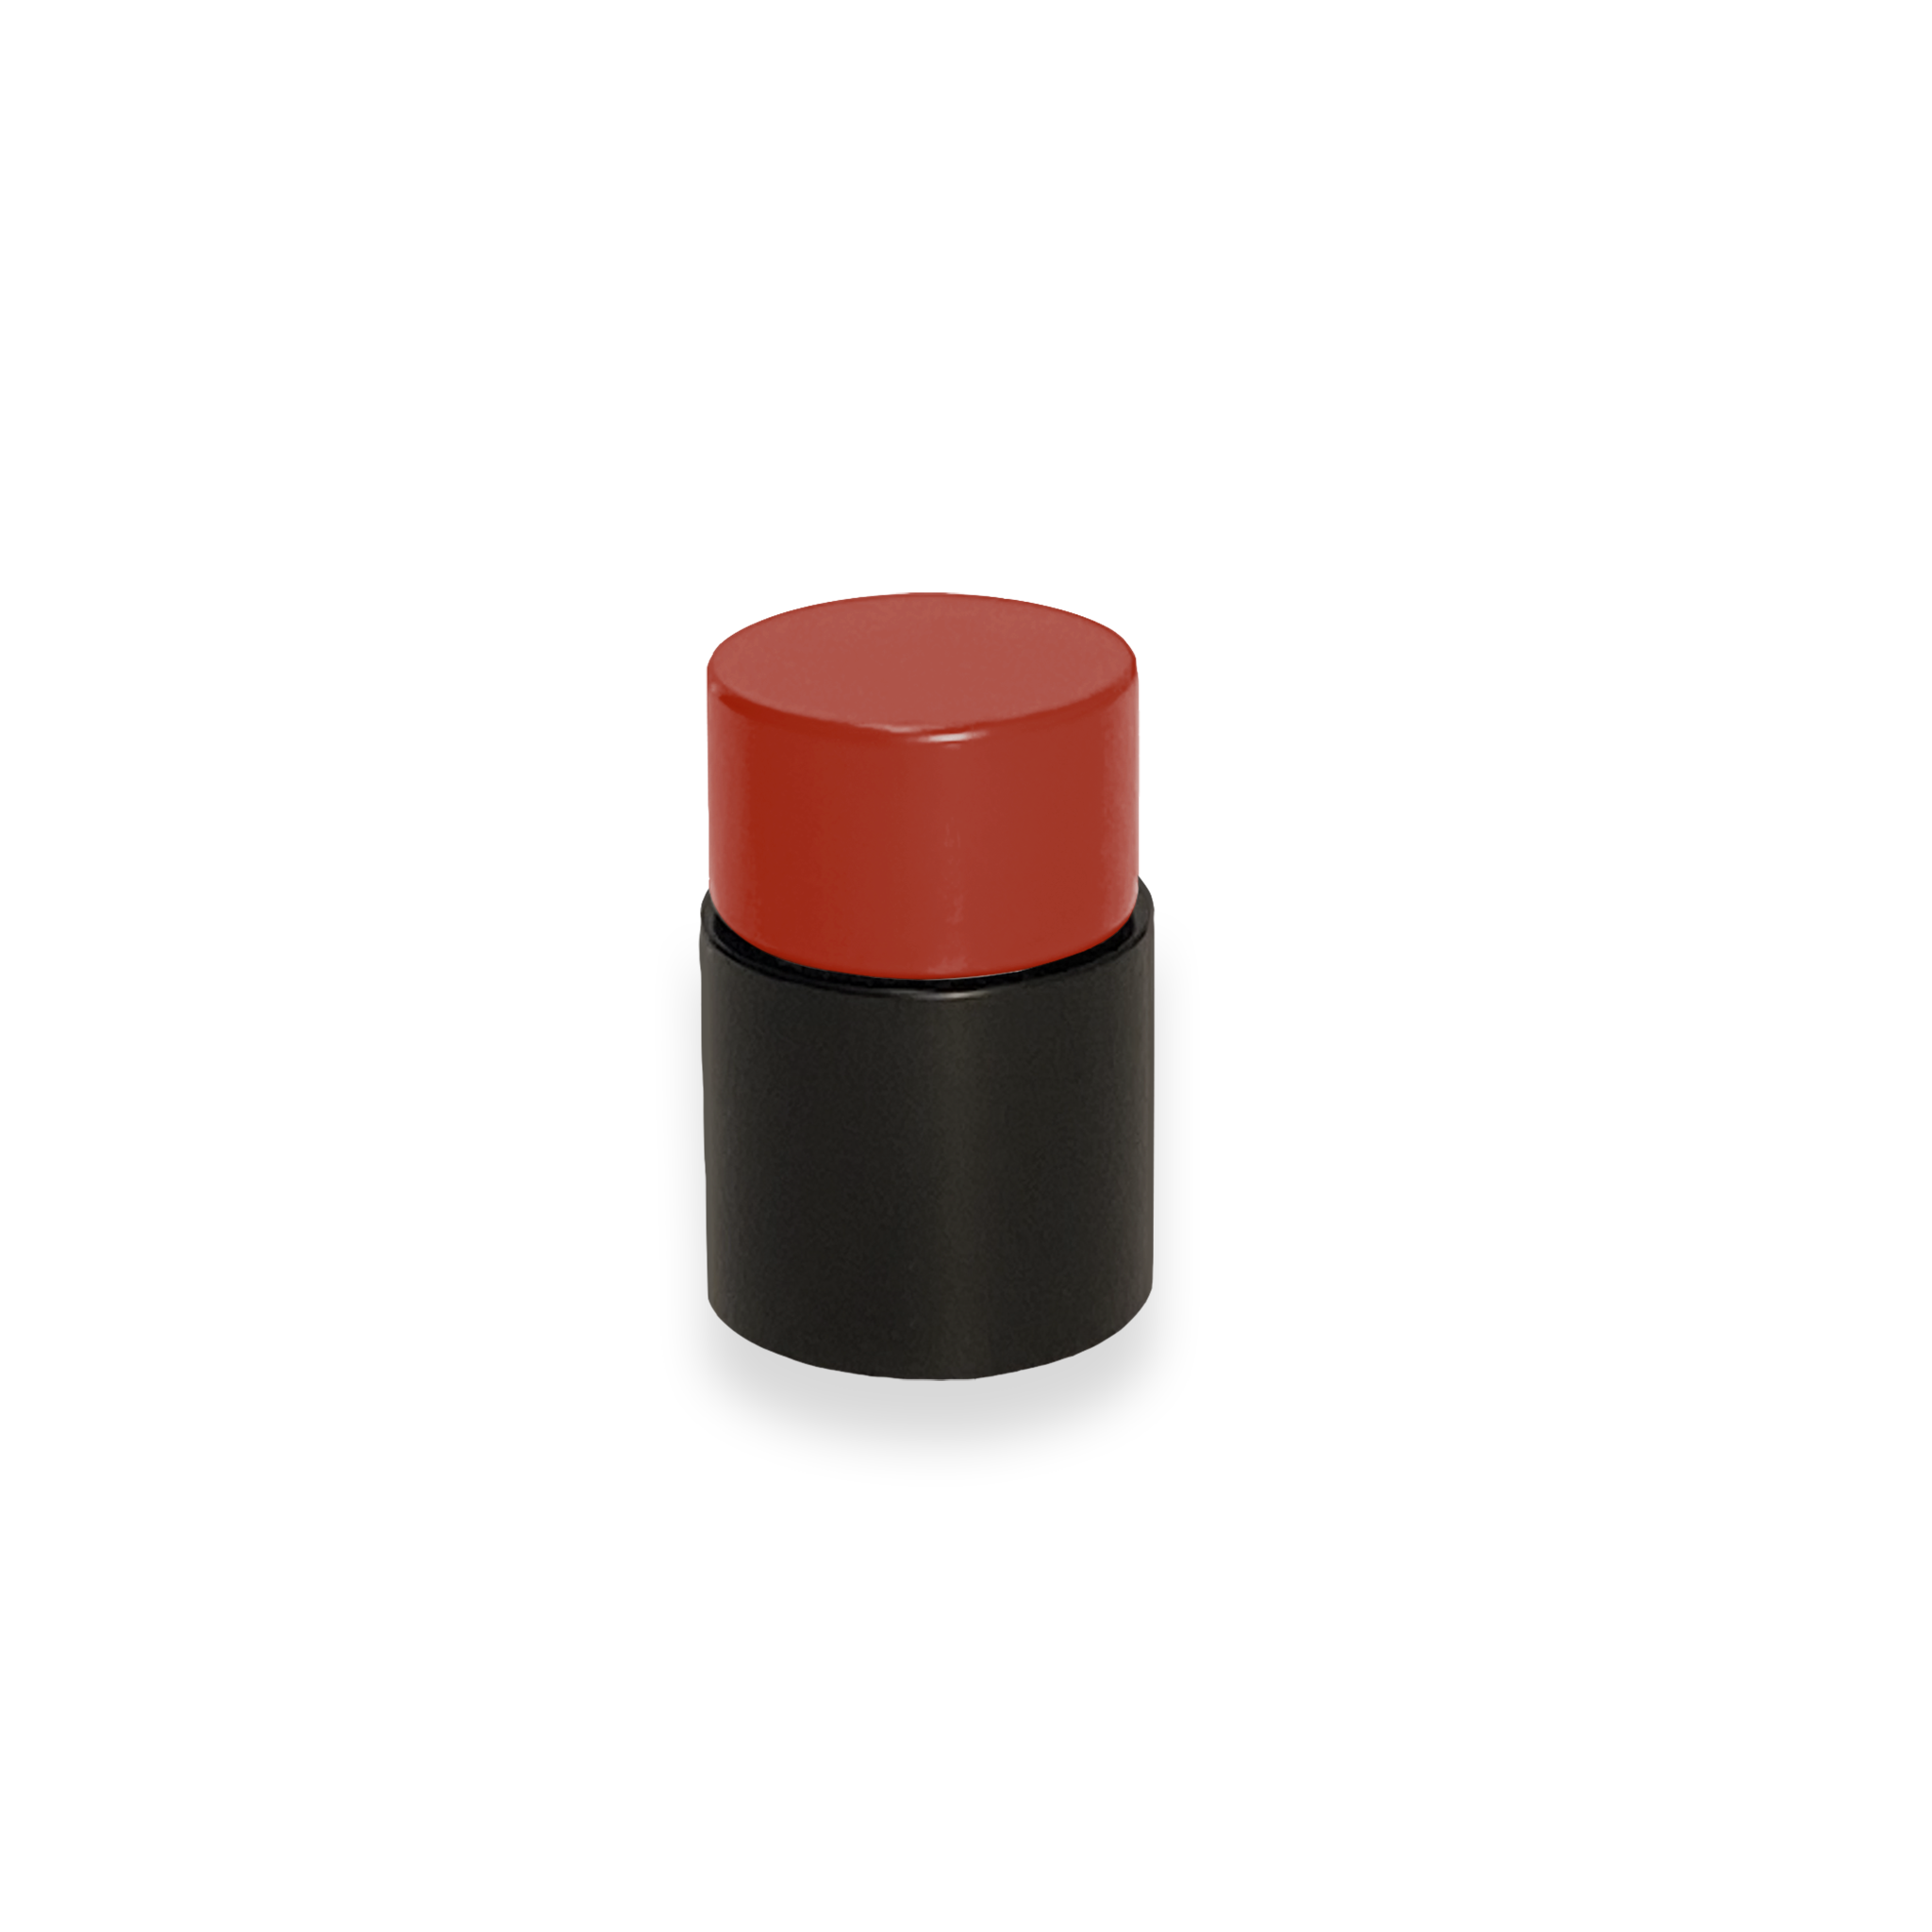 Black and riding hood red color Nip knob Dutton Brown hardware